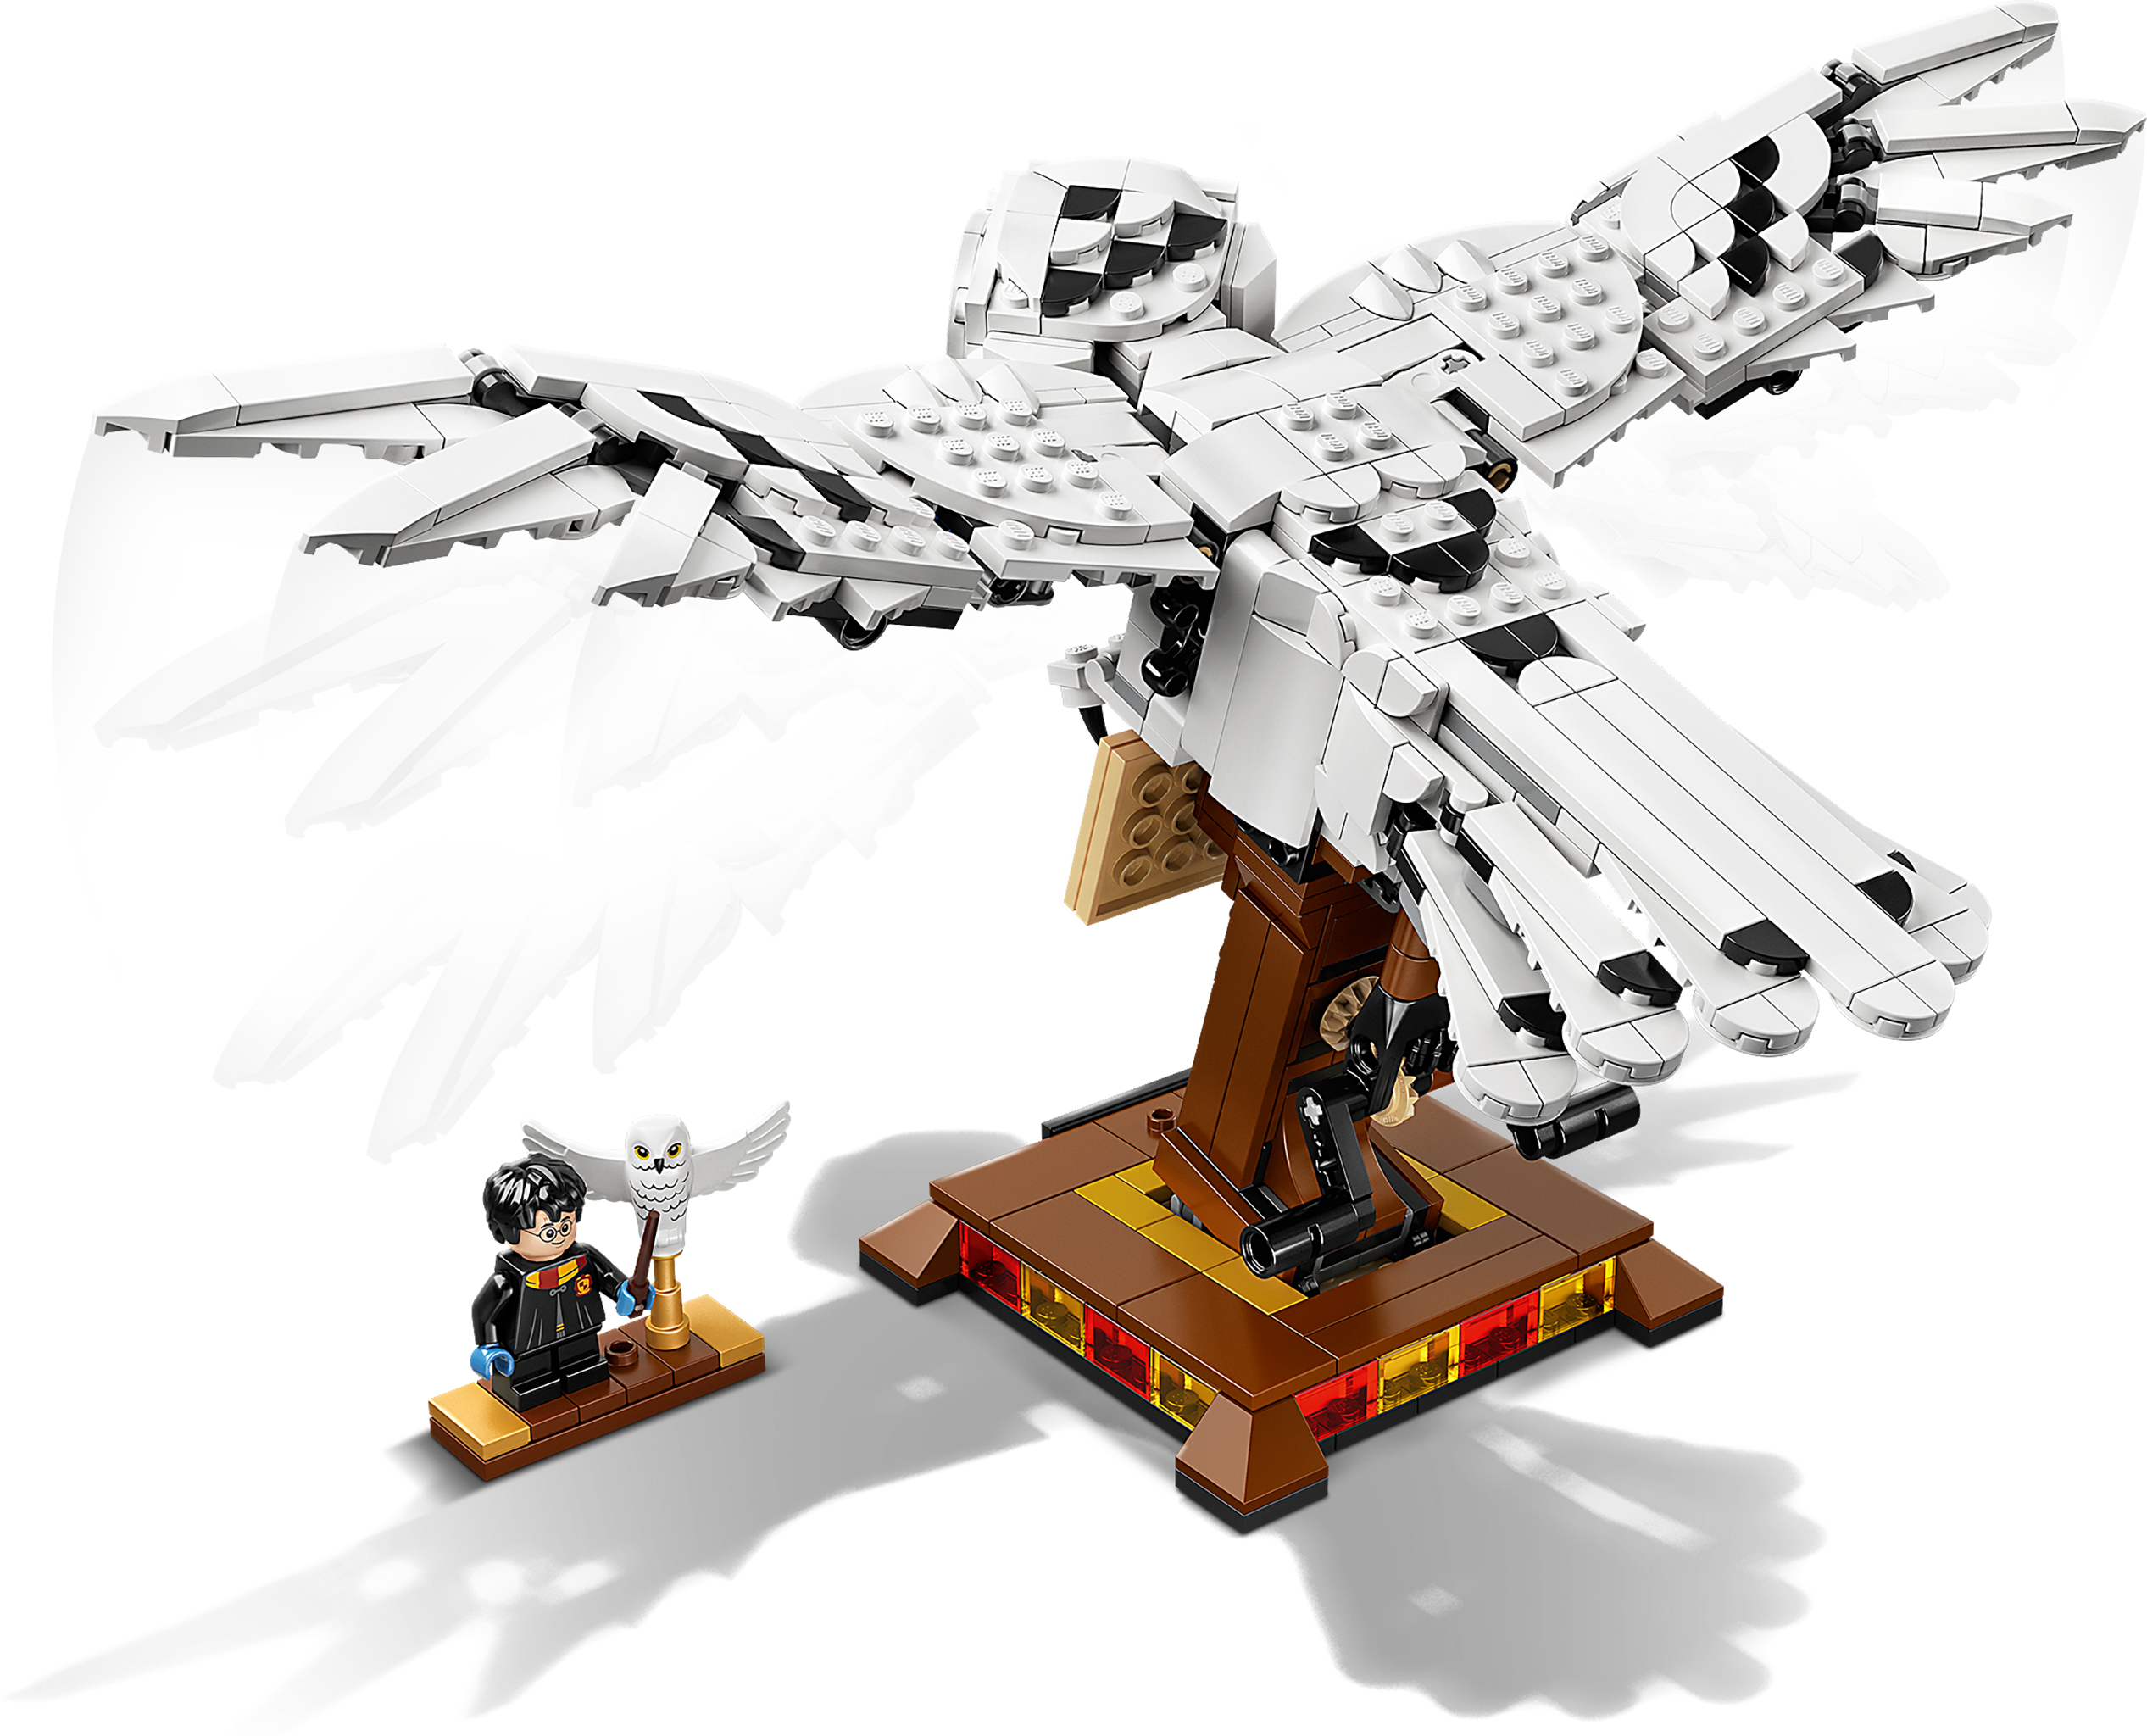 Details about   Lego 75979 Harry Potter Hedwig Set New with Sealed Box 